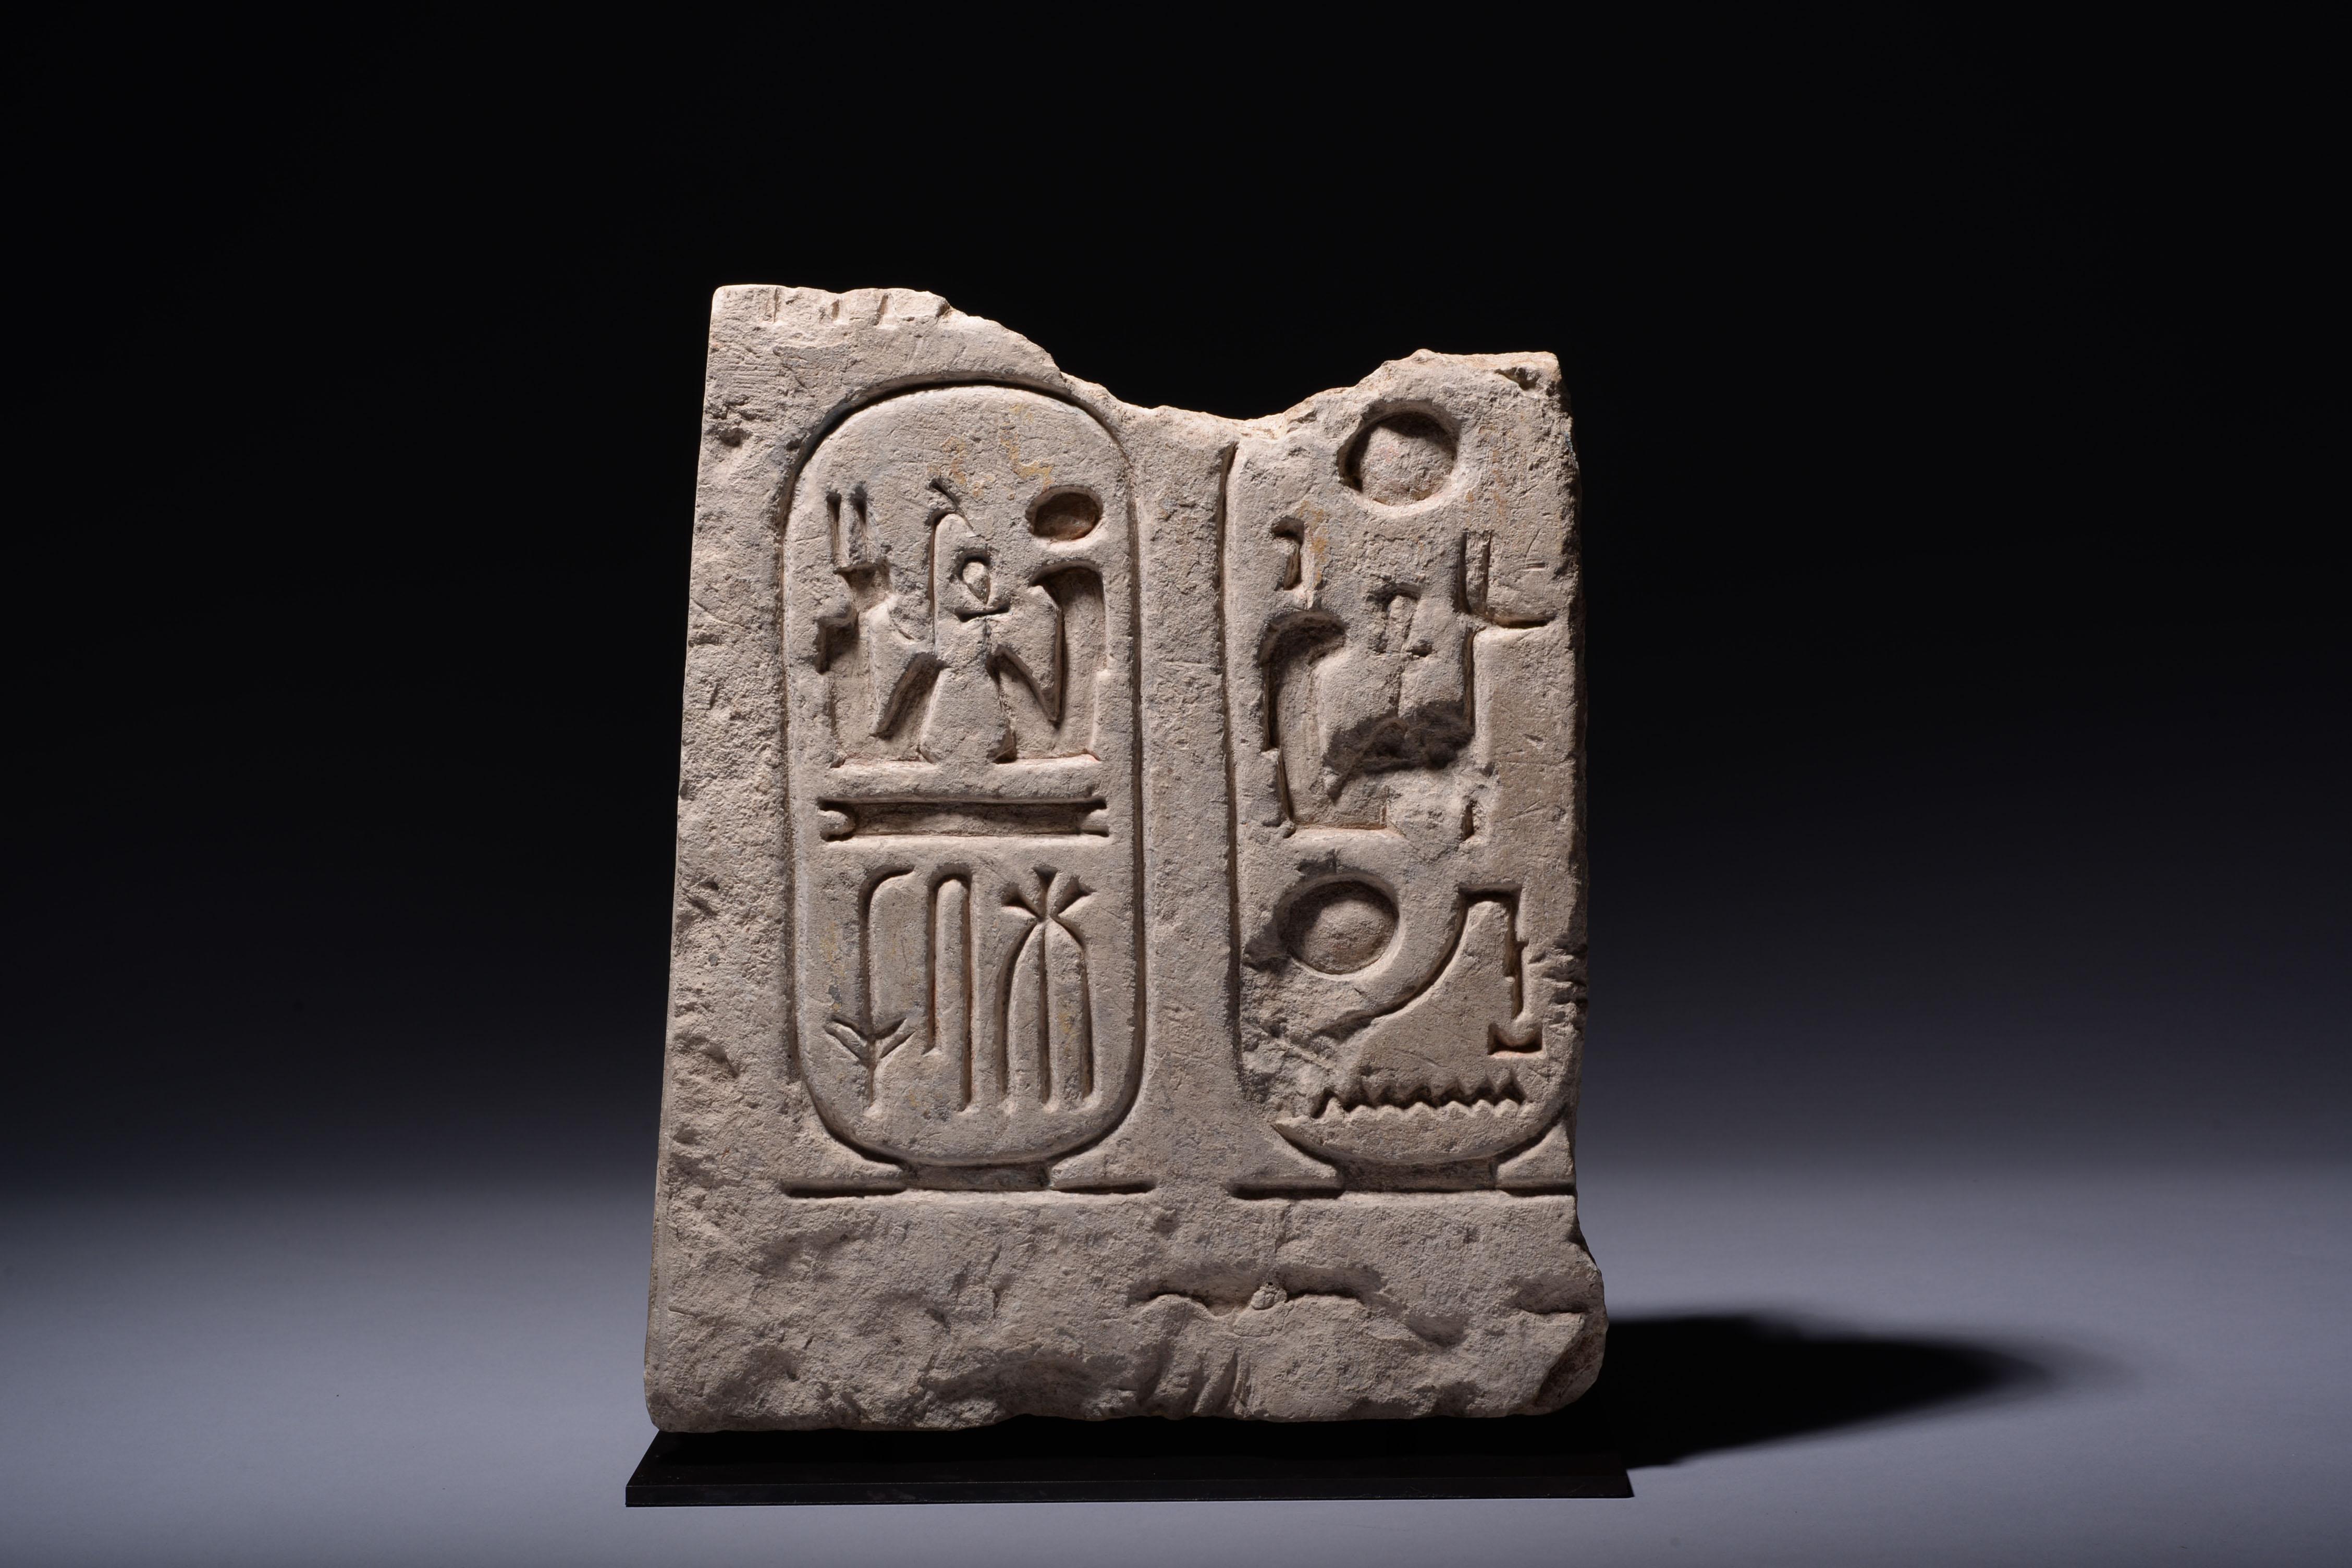 Egyptian limestone relief fragment with cartouches for Ramesses the Great, New Kingdom, 19th dynasty, circa 1279-1213 BC.

The cartouches carved in sunken relief with the Pharaoh’s throne and personal names, 'User-maat-Re Sotep-en-Re' and 'Ramessu